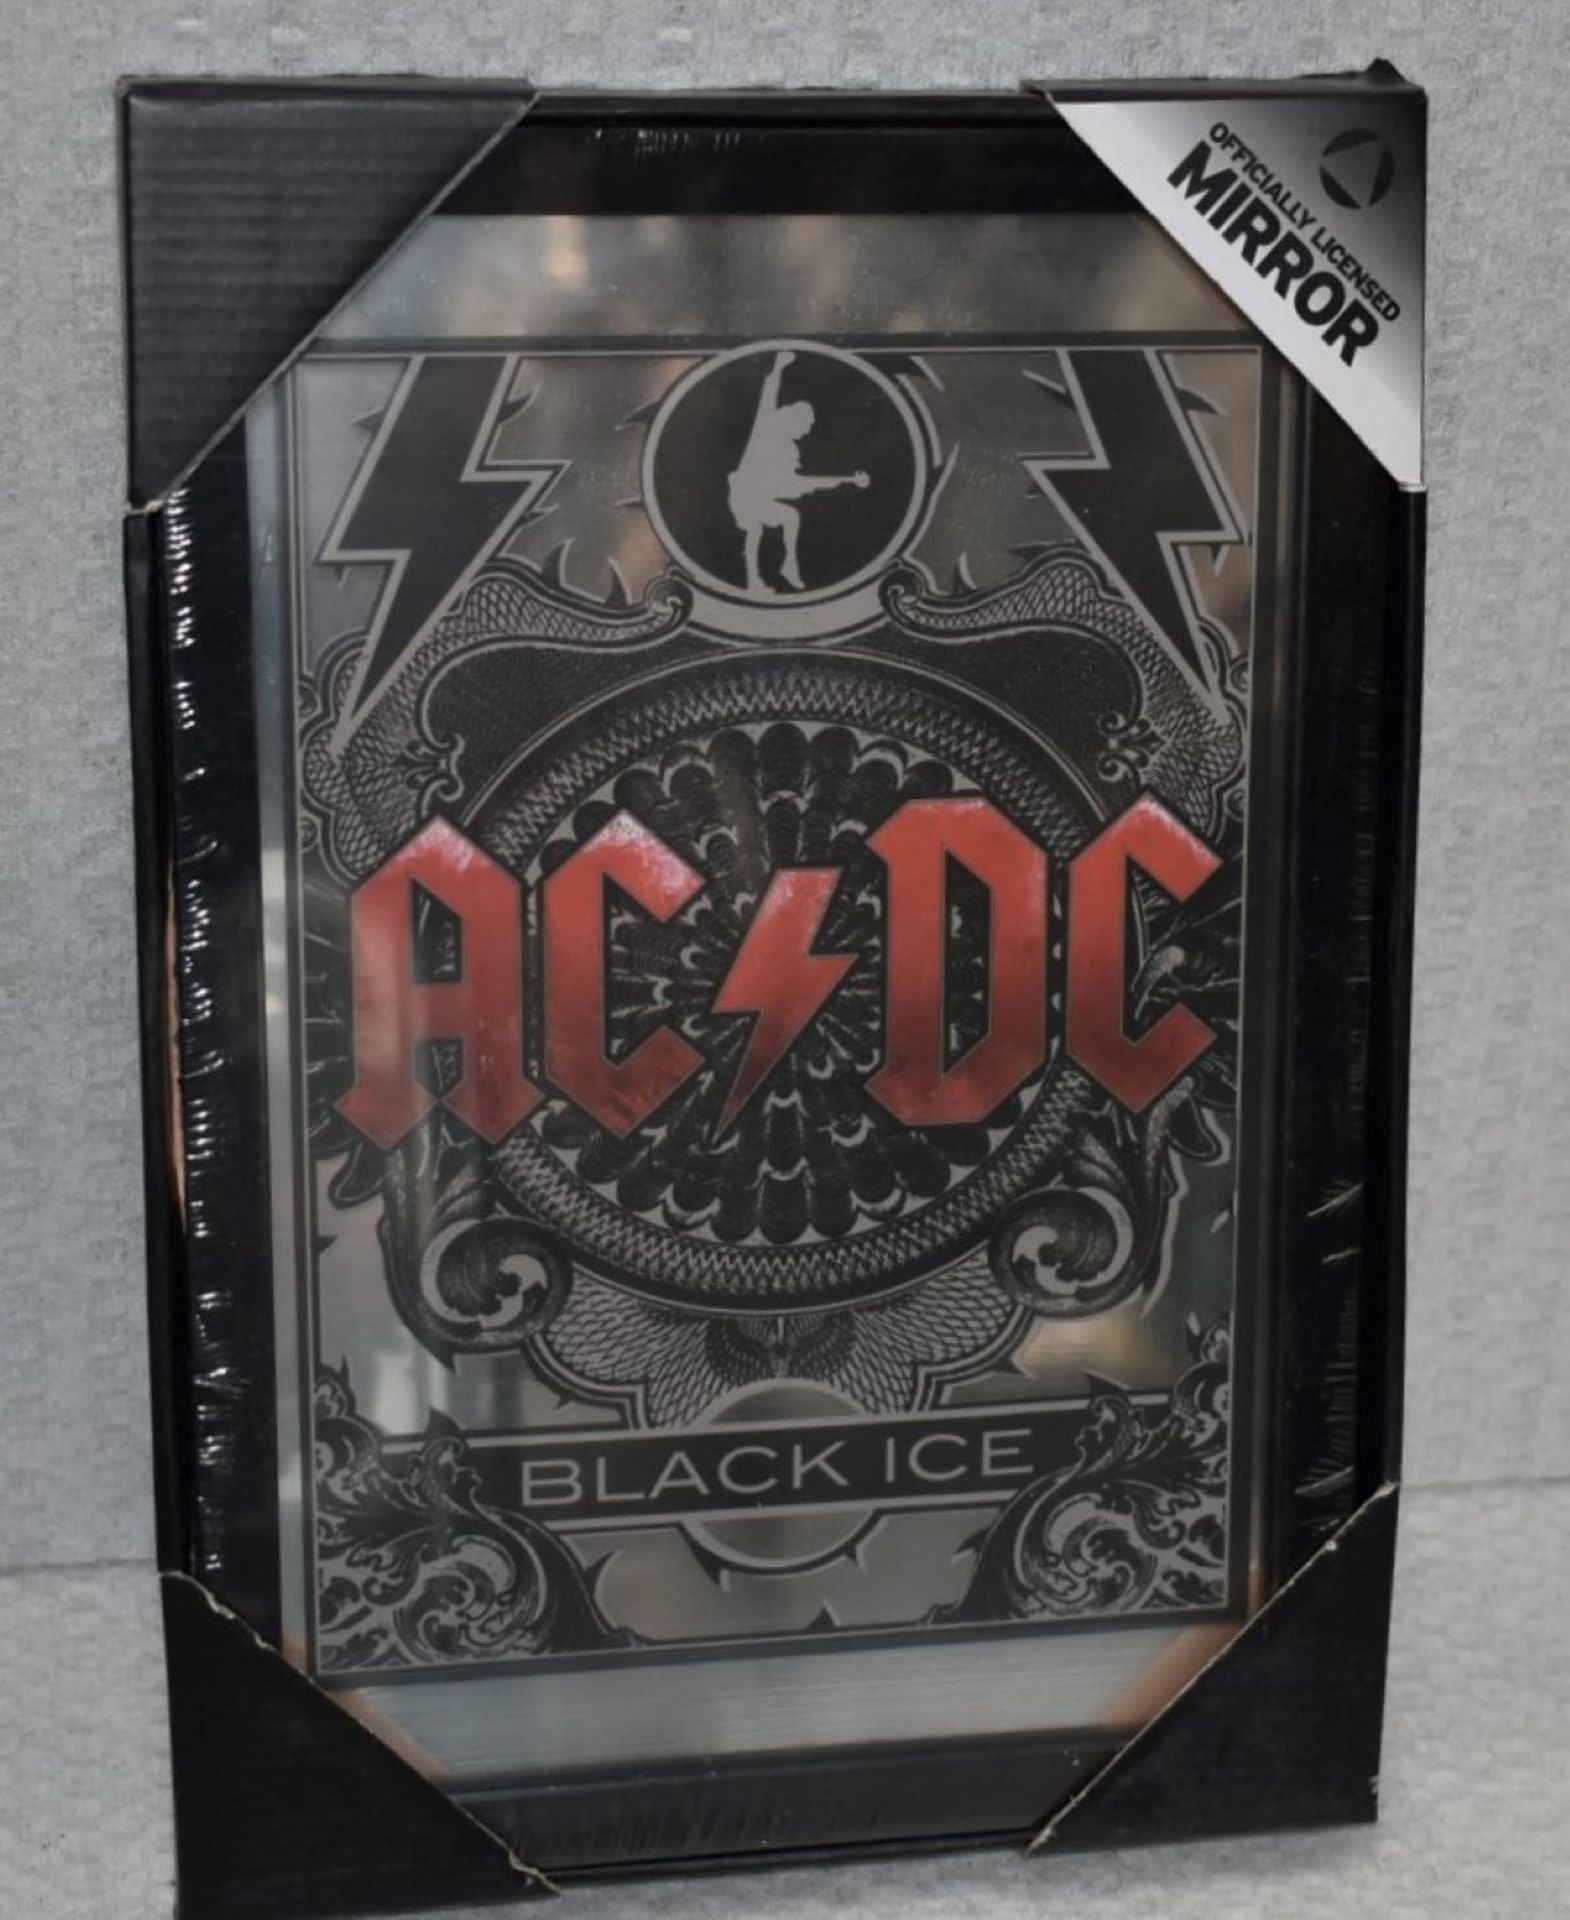 1 x ACDC Black Ice Wall Mirror - Officially Licensed Merchandise - Size: 32 x 22 cms -New & - Image 4 of 5